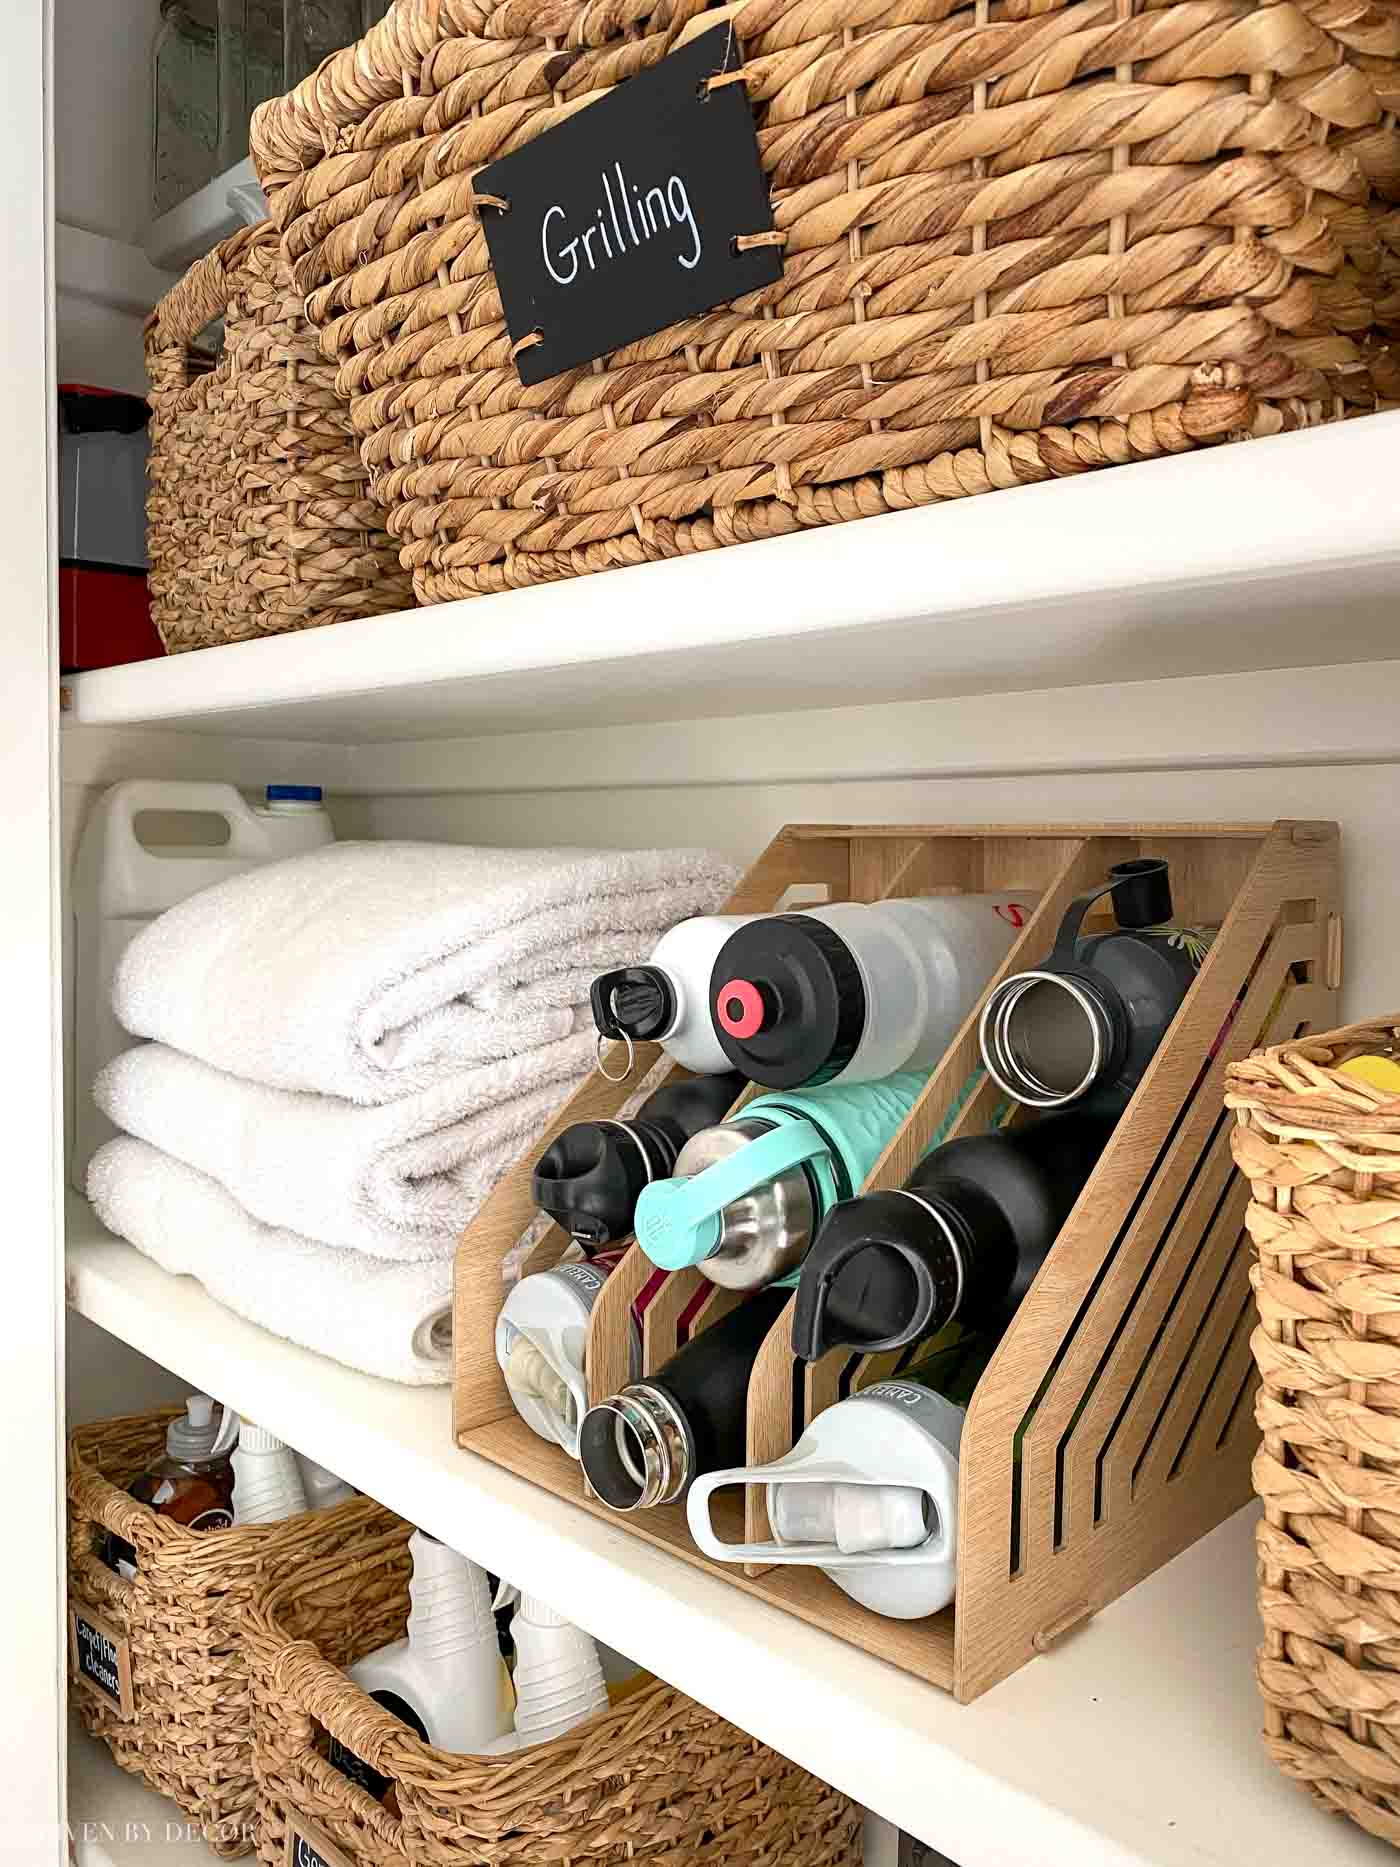 5 Best Kitchen Organizing Ideas For Small Spaces - H2OBungalow